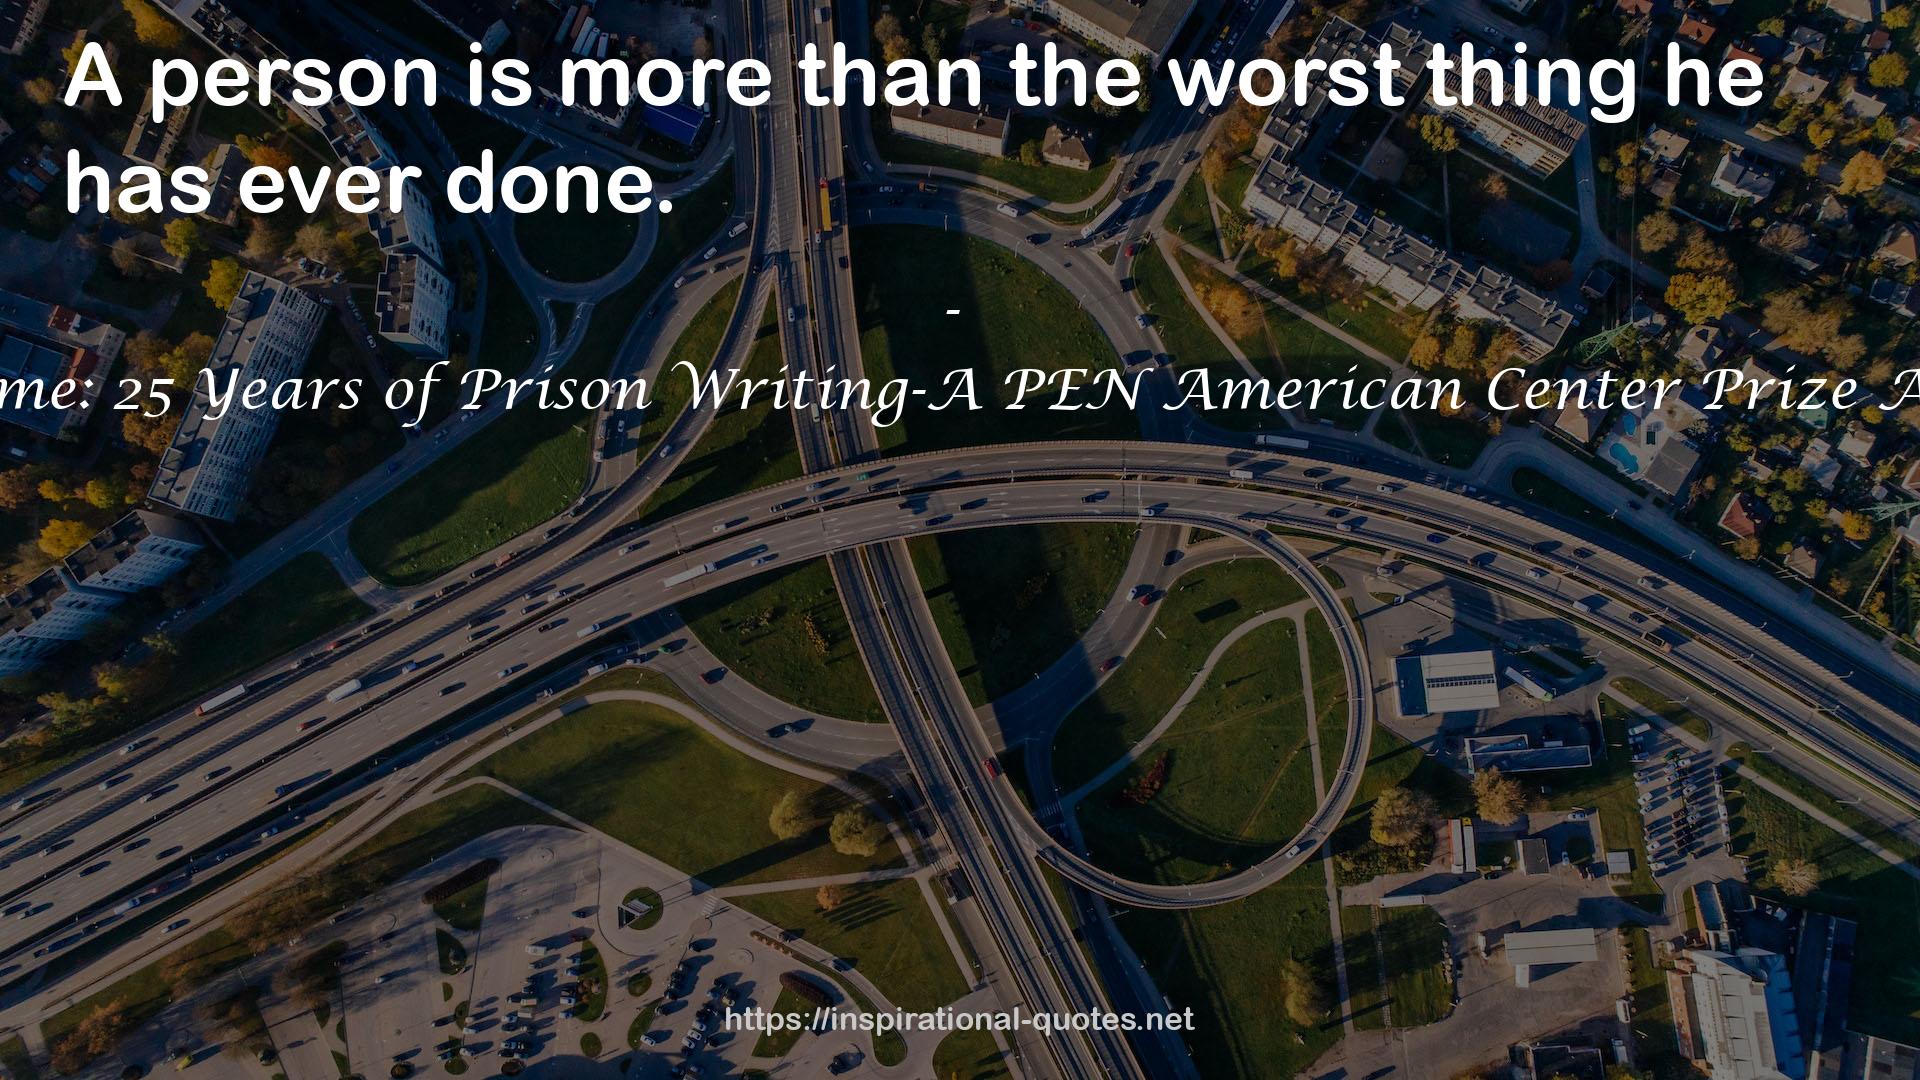 Doing Time: 25 Years of Prison Writing-A PEN American Center Prize Anthology QUOTES